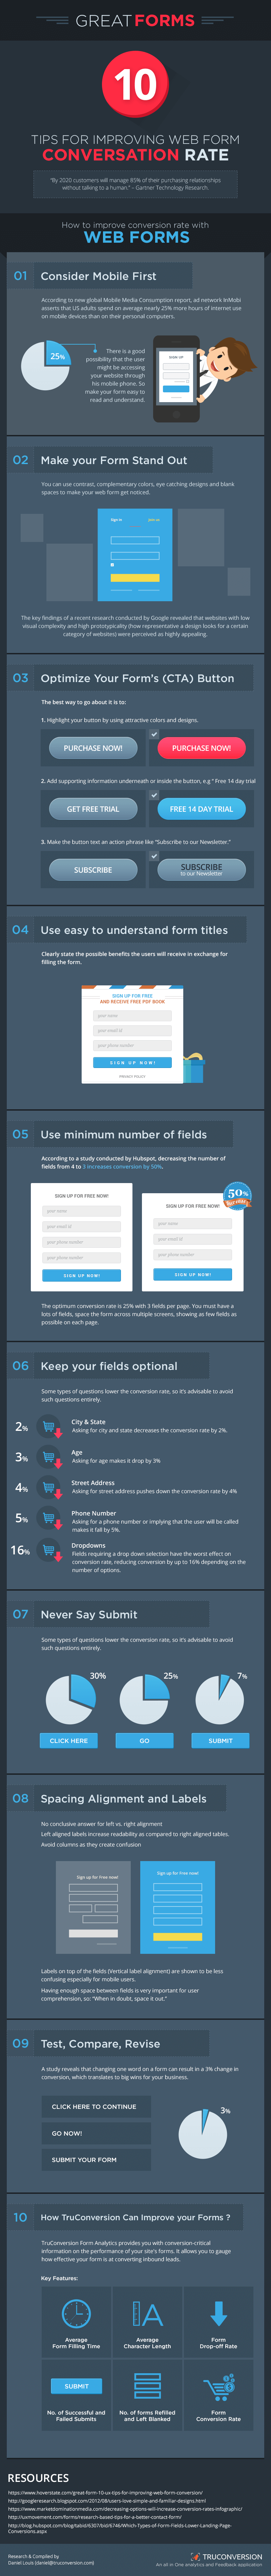 10 Tips to Improve Web Form Design to Boost Conversions